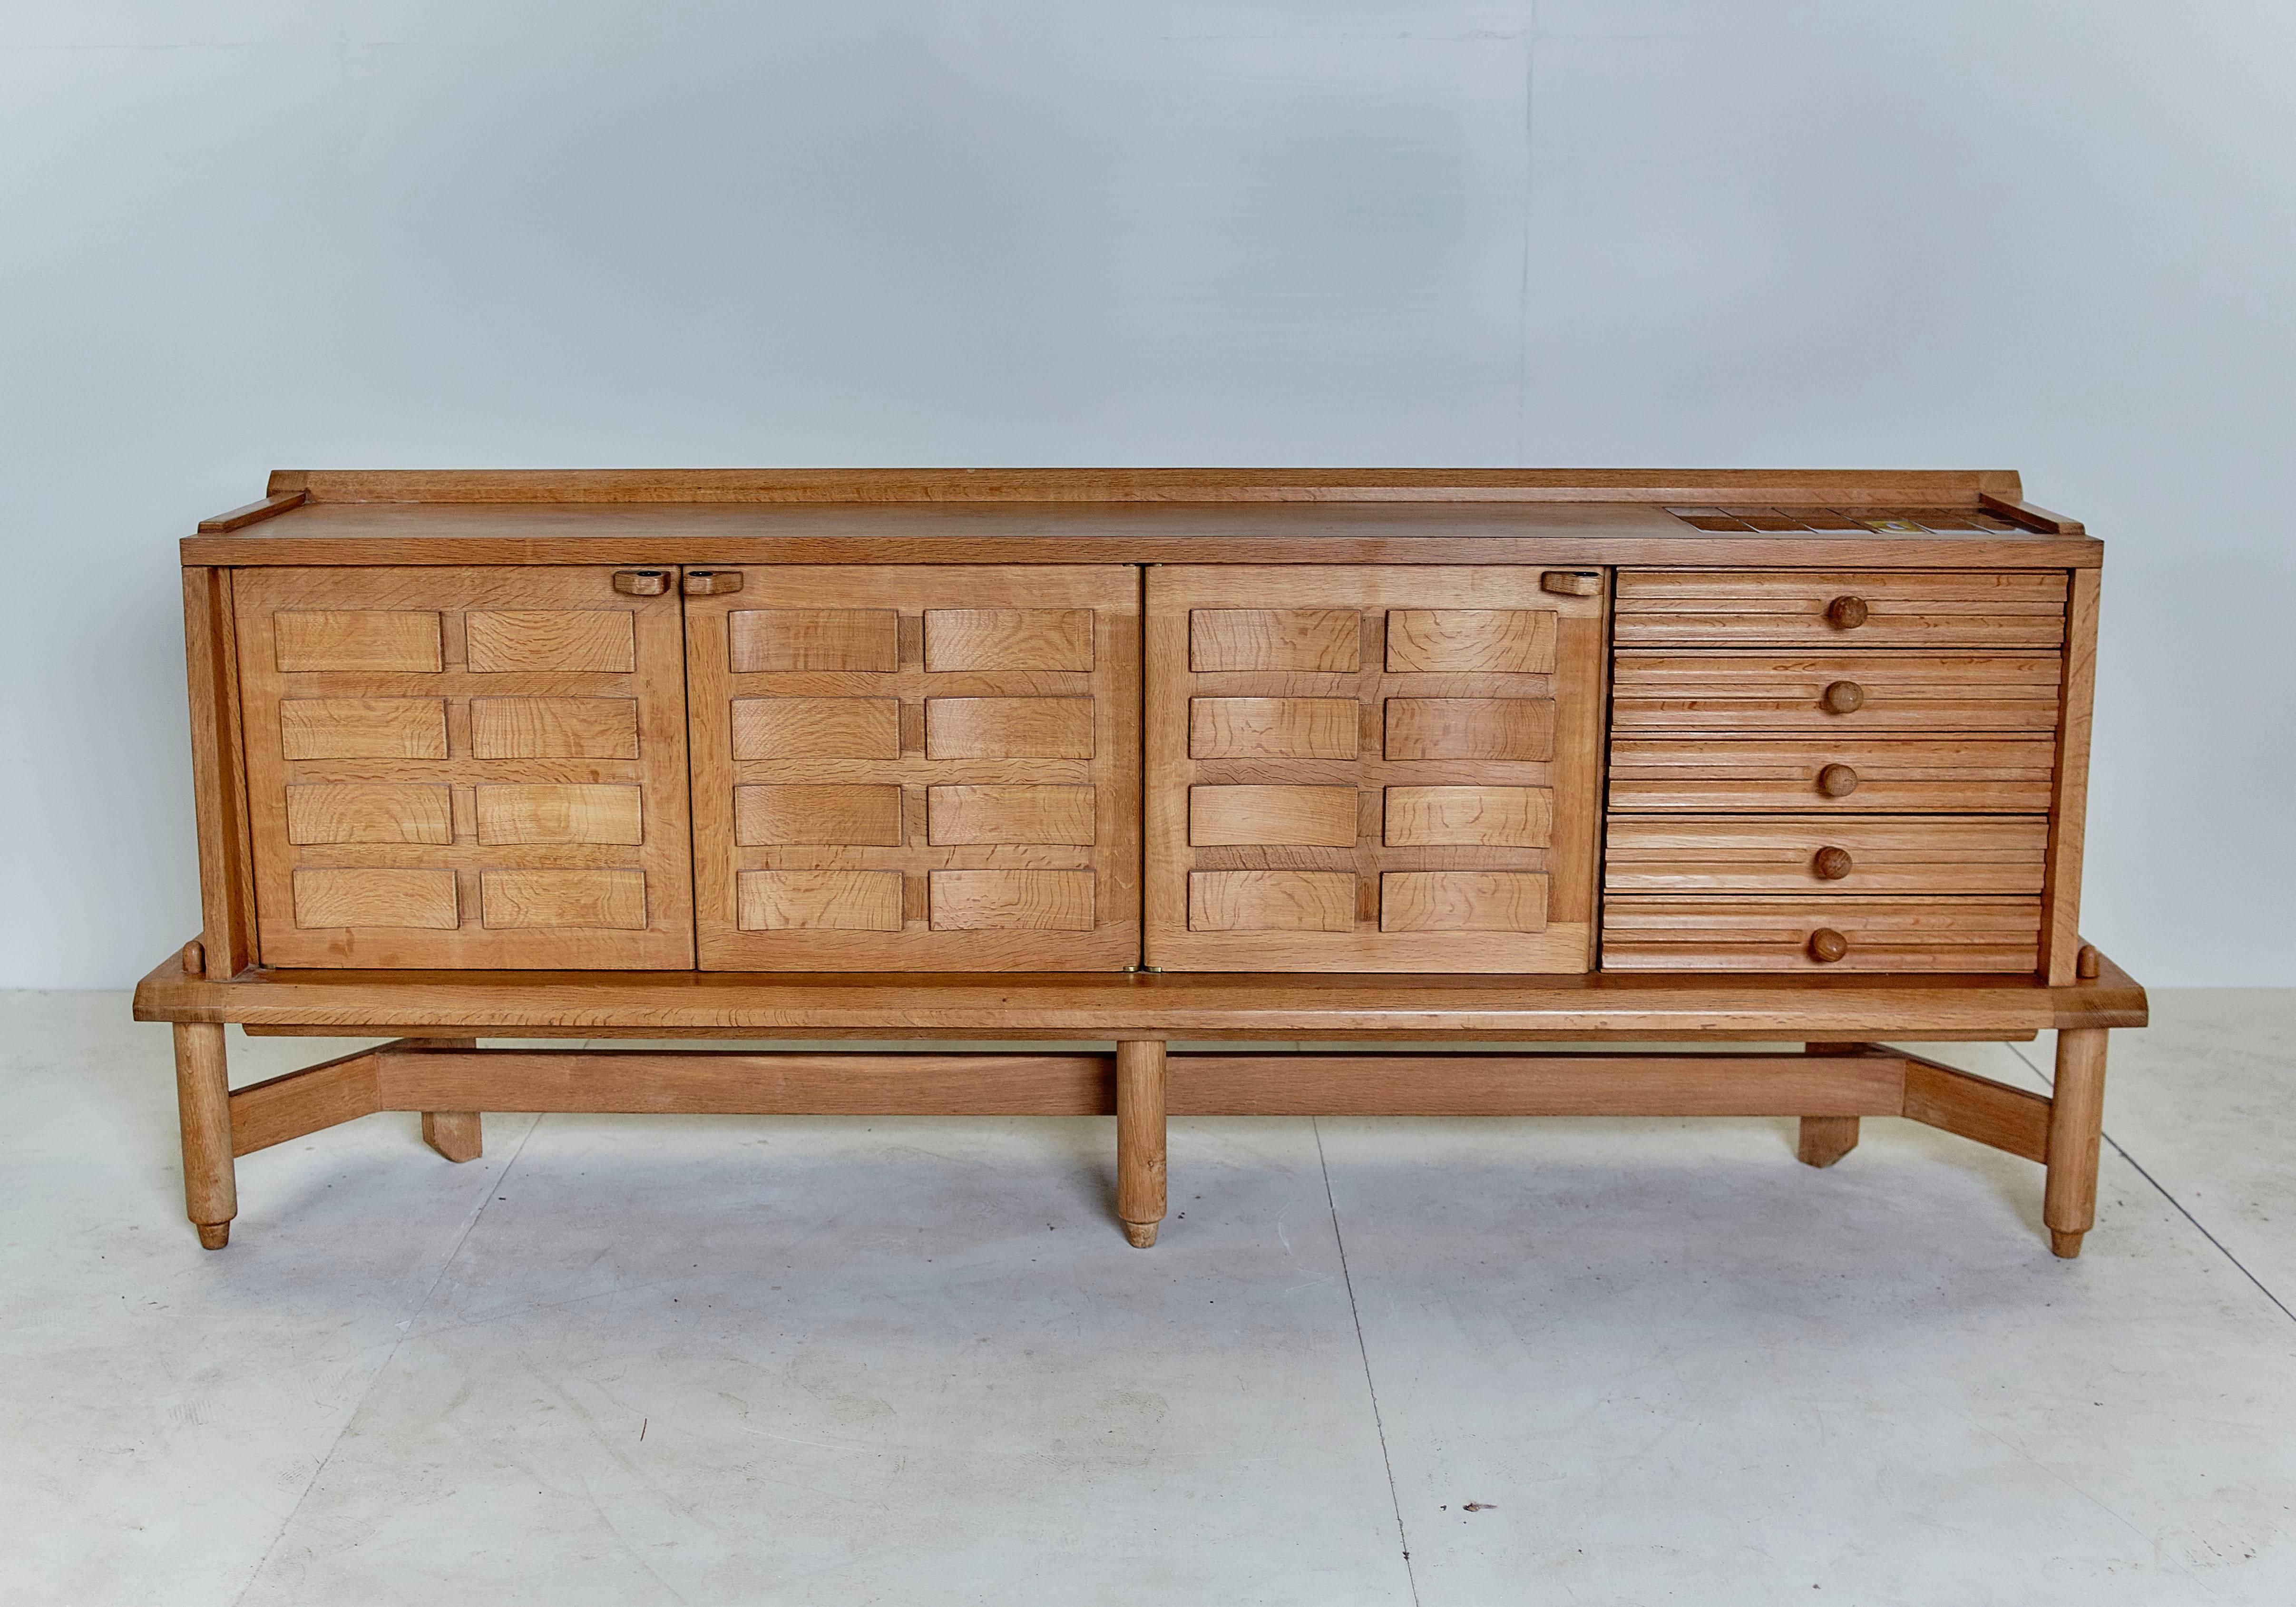 Beautiful and rare oak wall unit with two sliding doors and drawers, designed by the French Robert Guillerme and Jacques Chambron, from the 1960s. 
Typical decorations in ceramic tiles on the plateau on the right.

It is important to know that